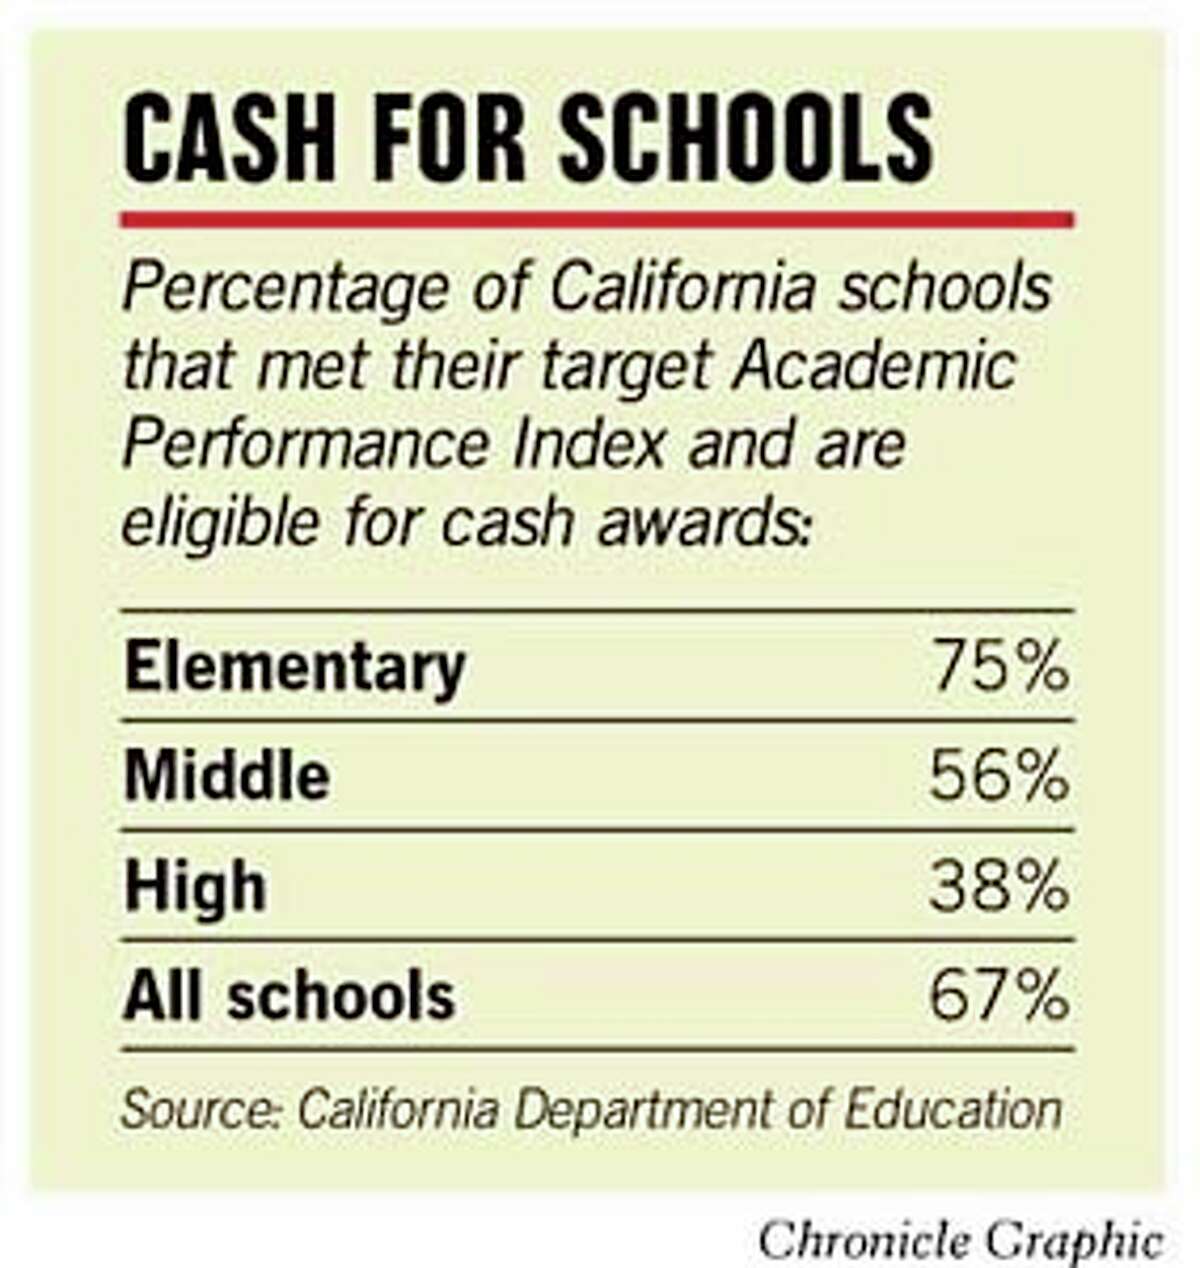 Cash for Schools. Chronicle Graphic